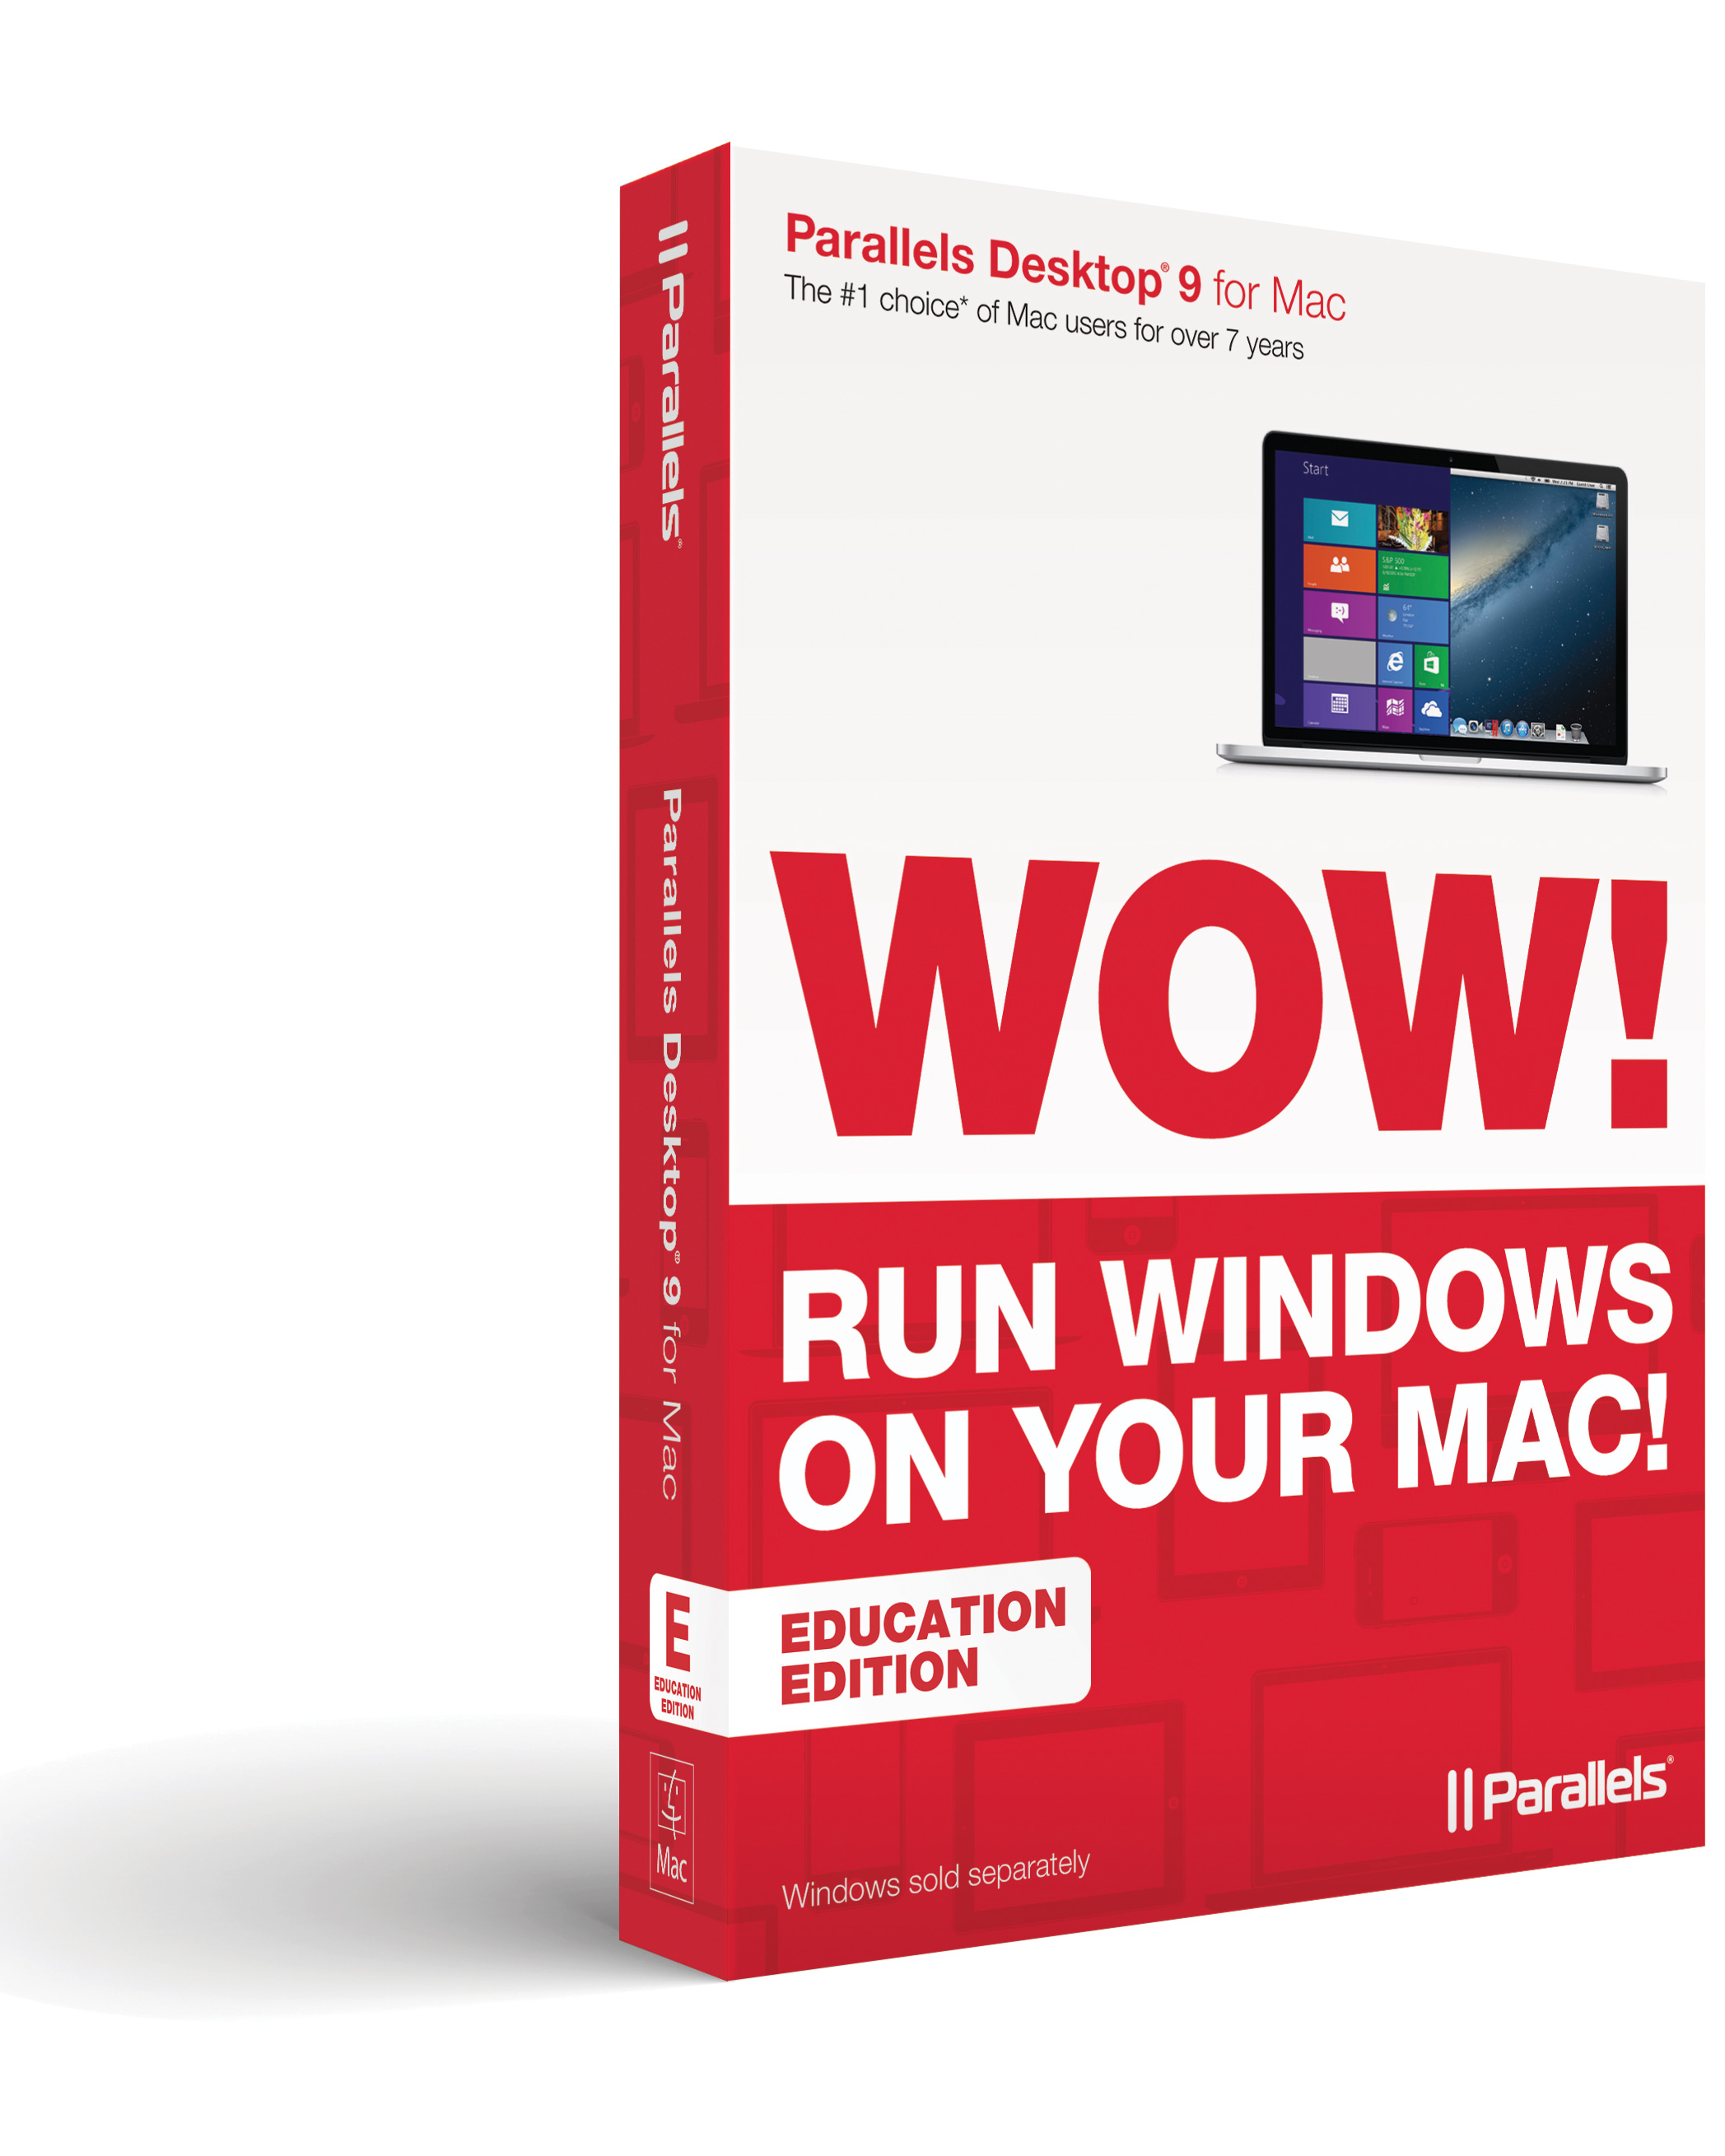 Is parallels free for mac